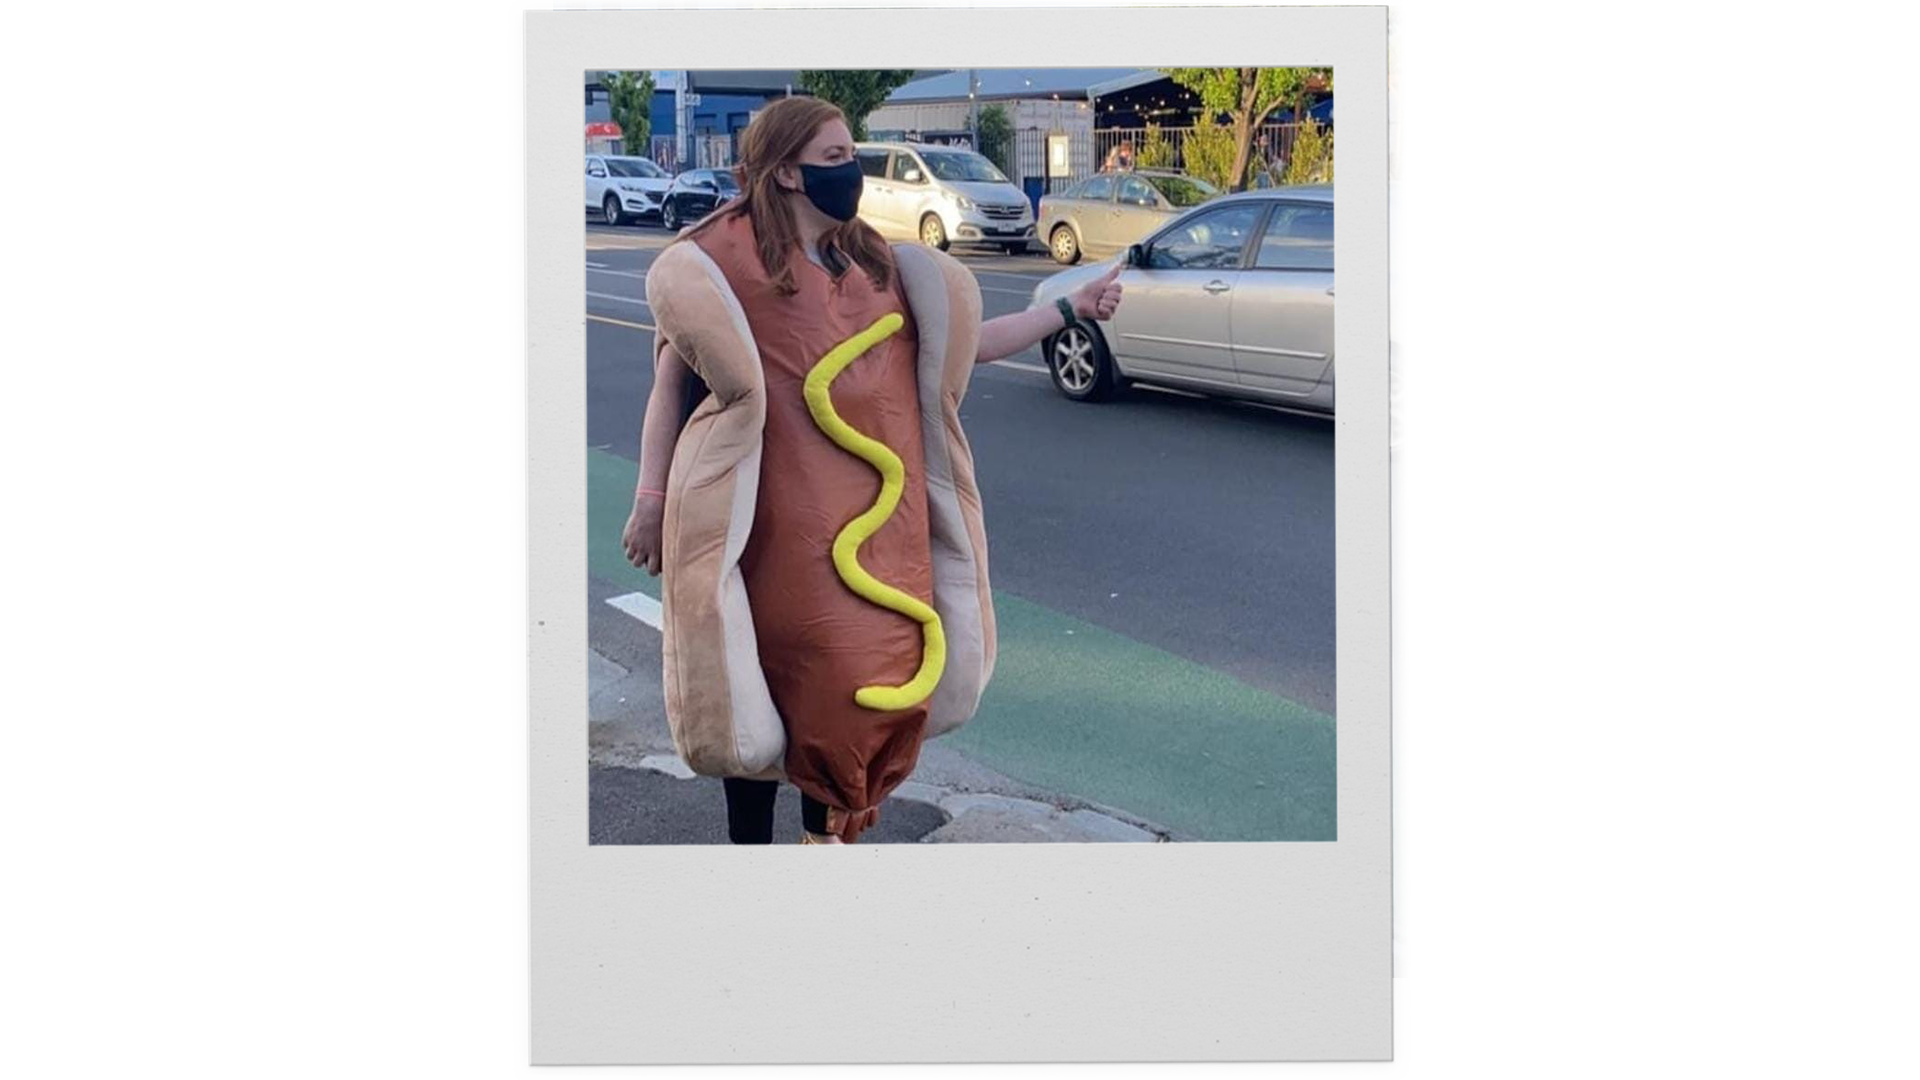 A polaroid photo of a woman in a hot dog costume hitch-hiking.